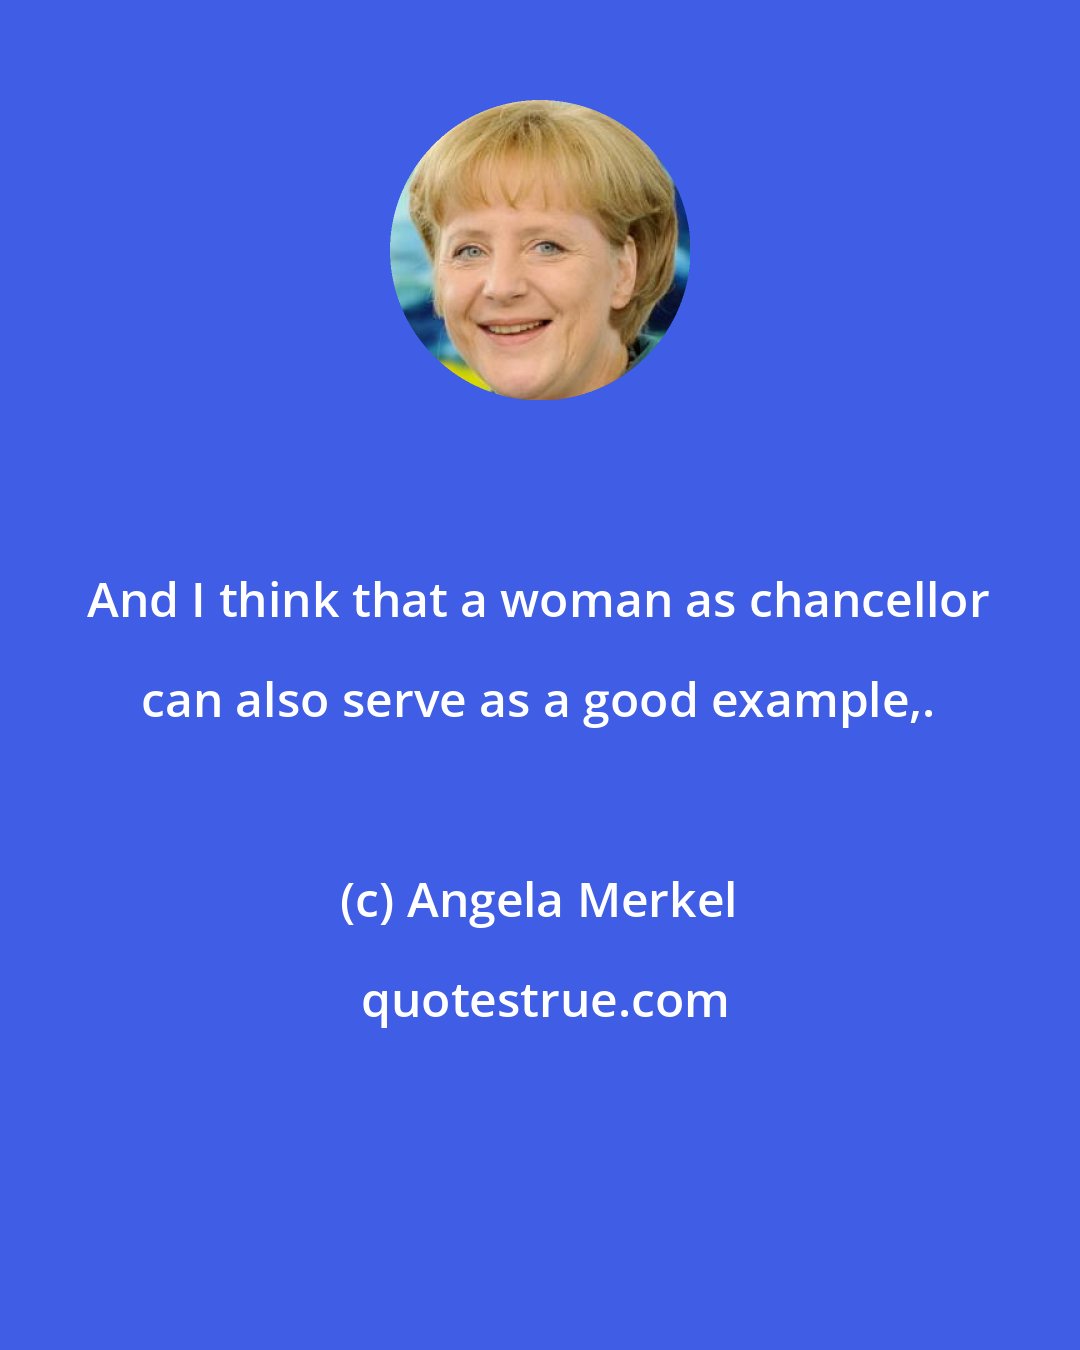 Angela Merkel: And I think that a woman as chancellor can also serve as a good example,.